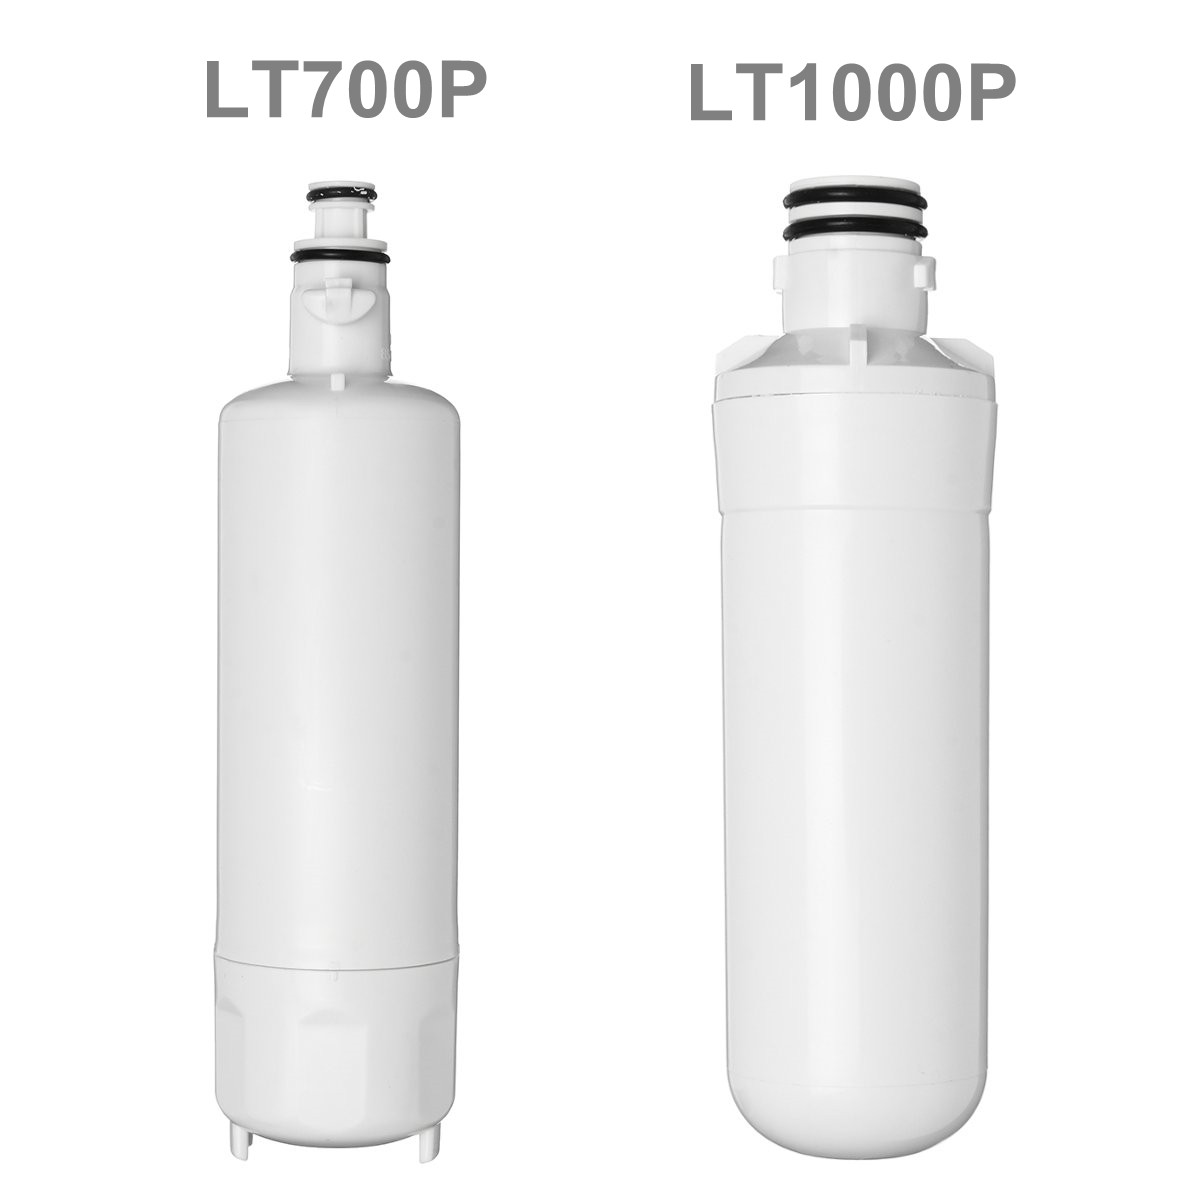 Refrigerator-Water-Filter-Replacement-Cartridge-for--LG-LT700P-LT1000P-1540596-8